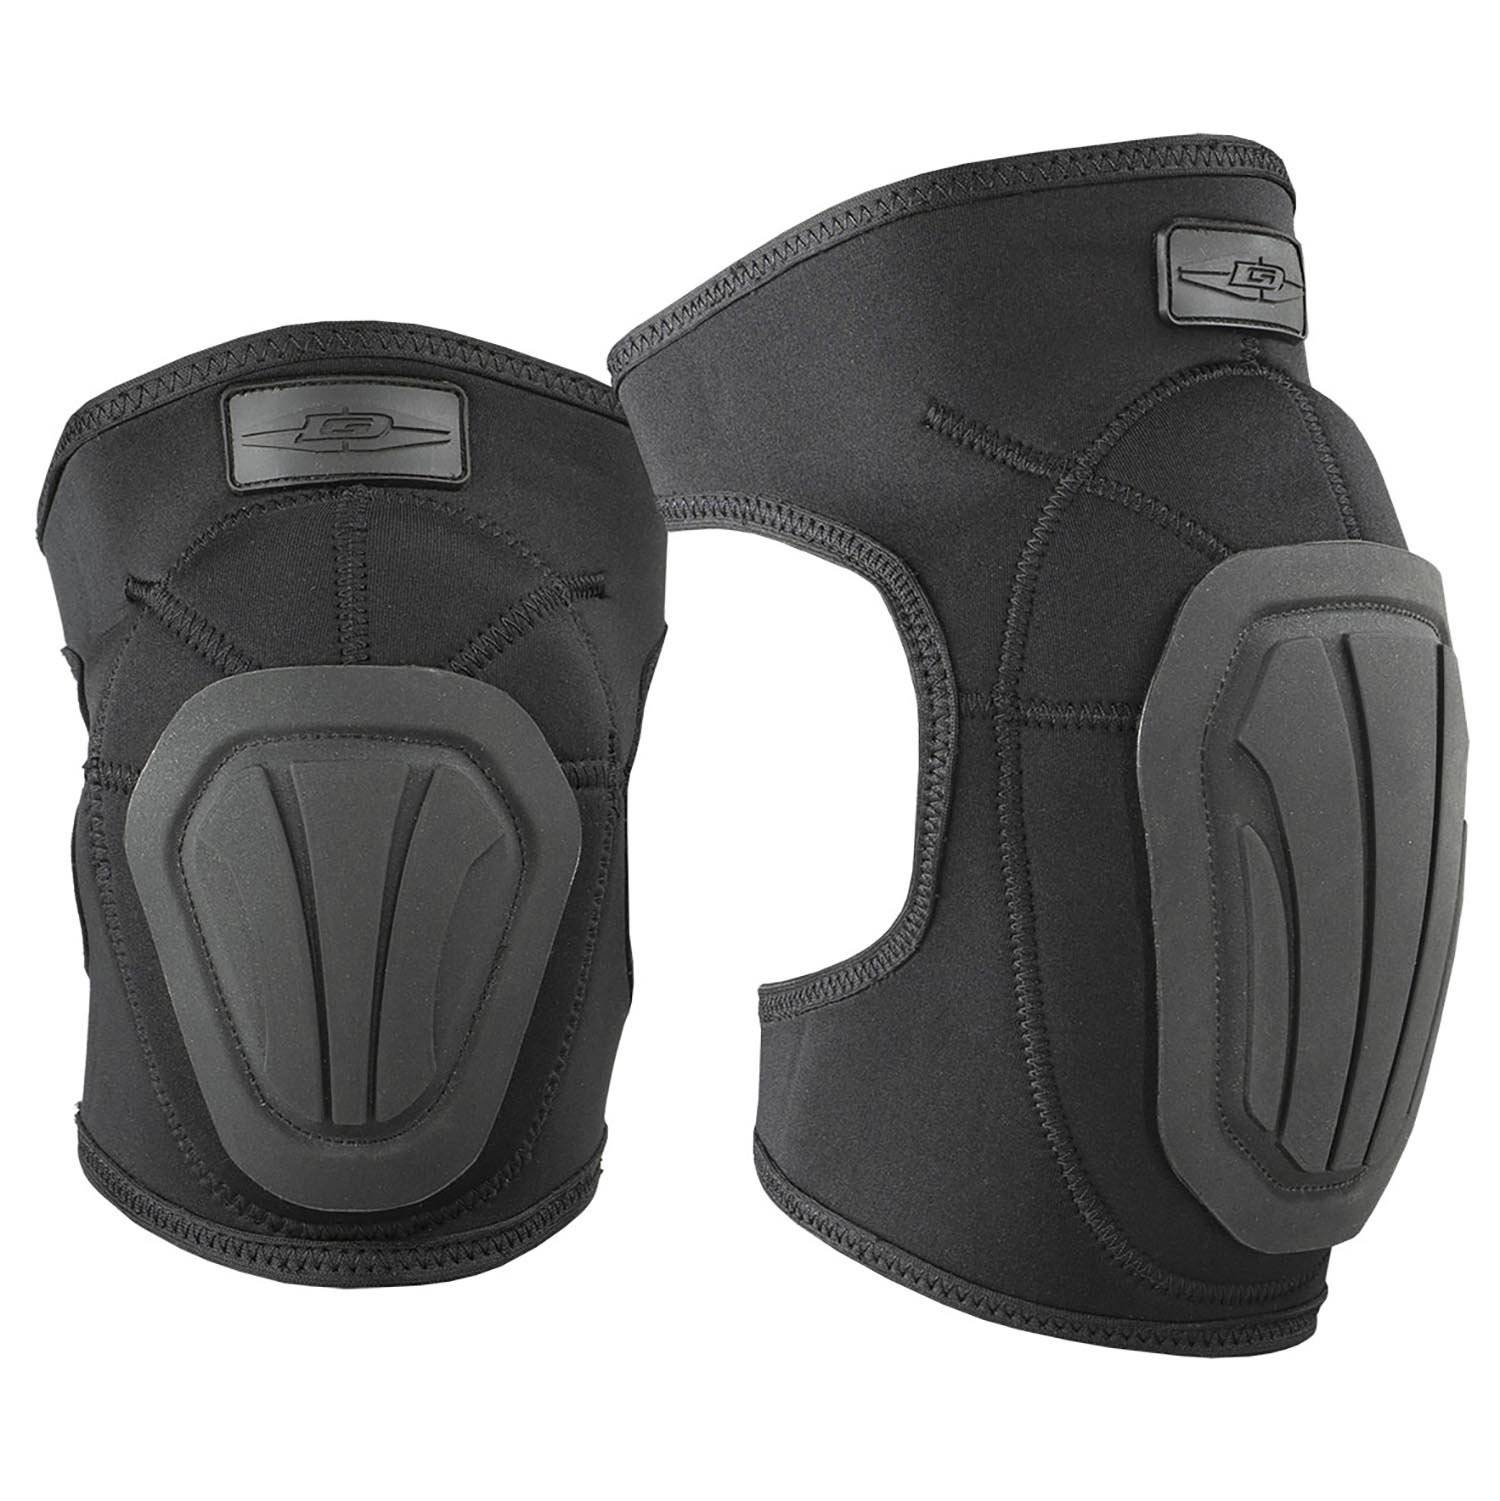 DAMASCUS IMPERIAL NEOPRENE KNEE PADS WITH REINFORCED CAPS